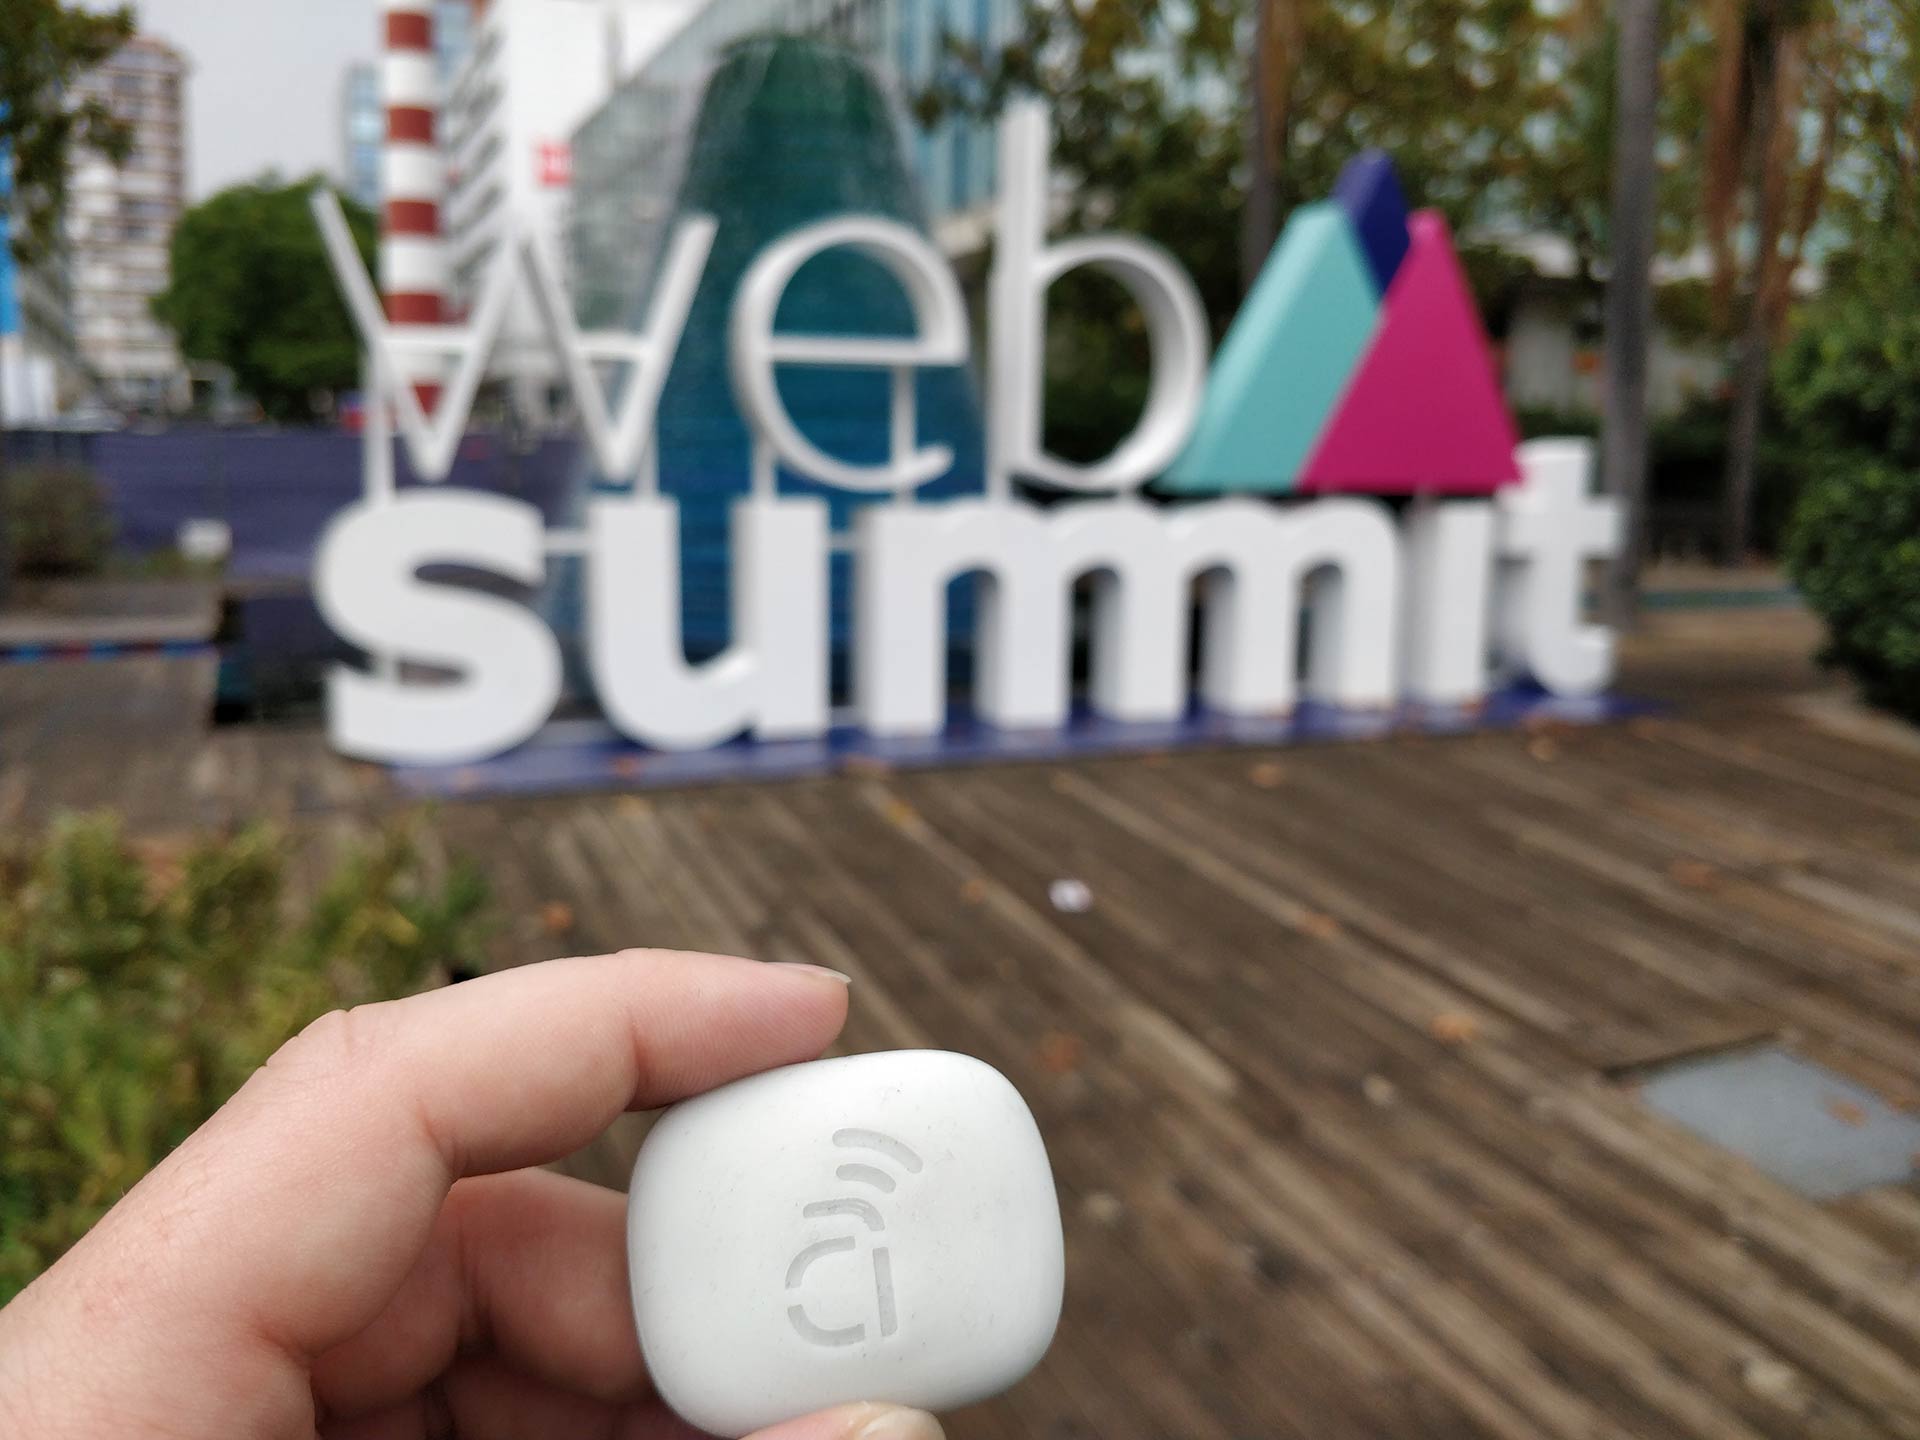 Anything Connected at Web Summit 2018 Lisbon